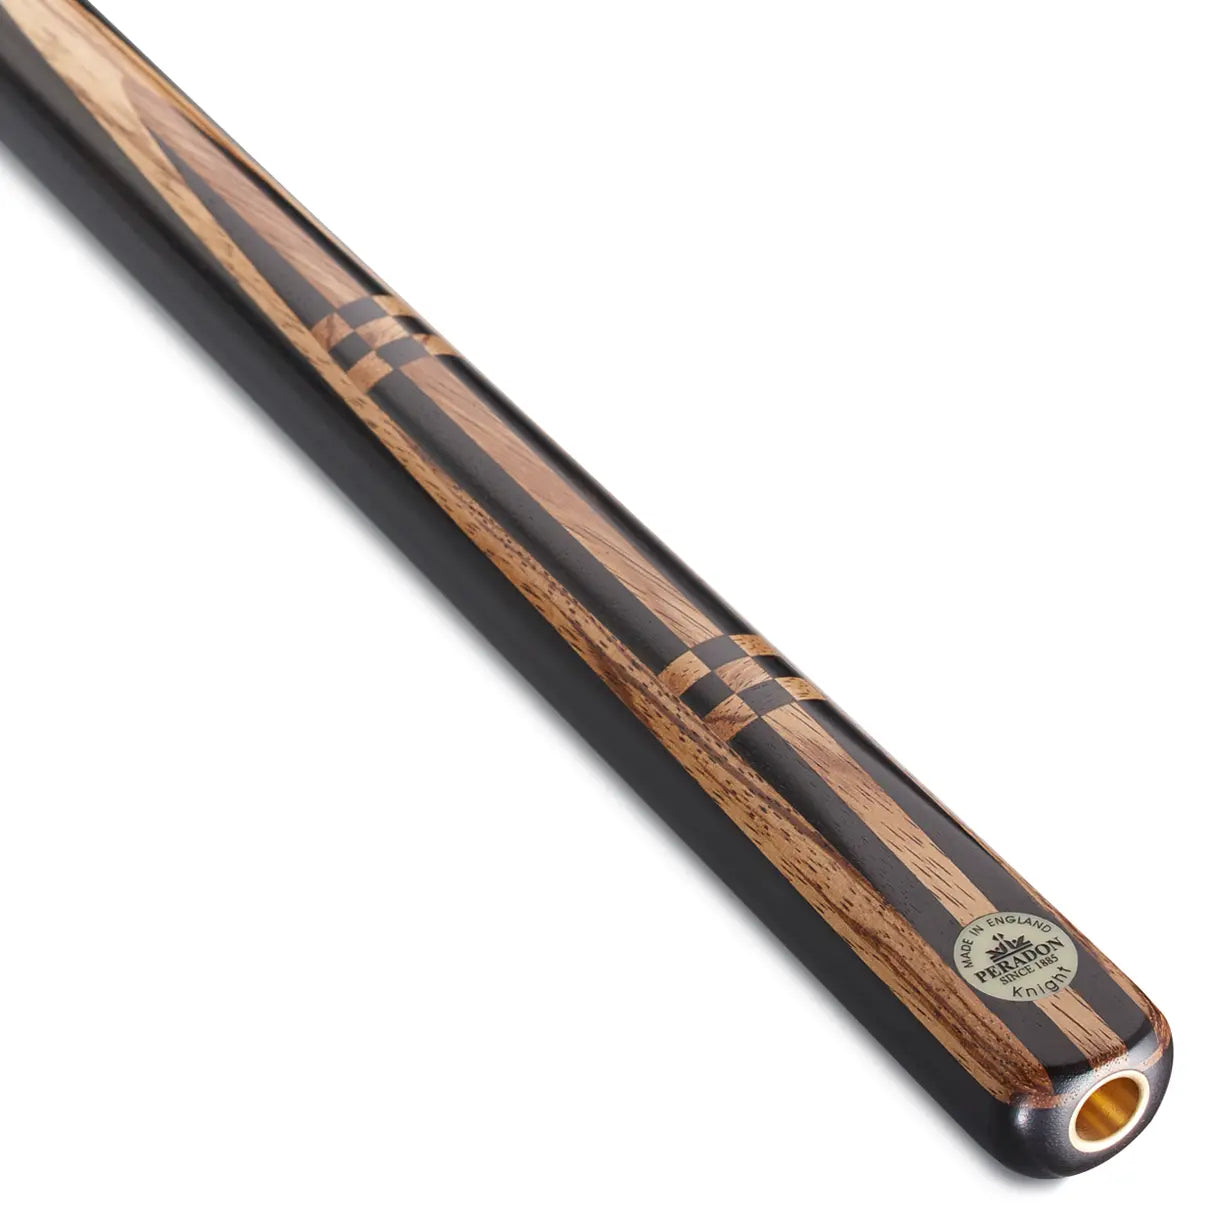 Peradon Knight 3/4 Jointed Snooker Cue. On angle view